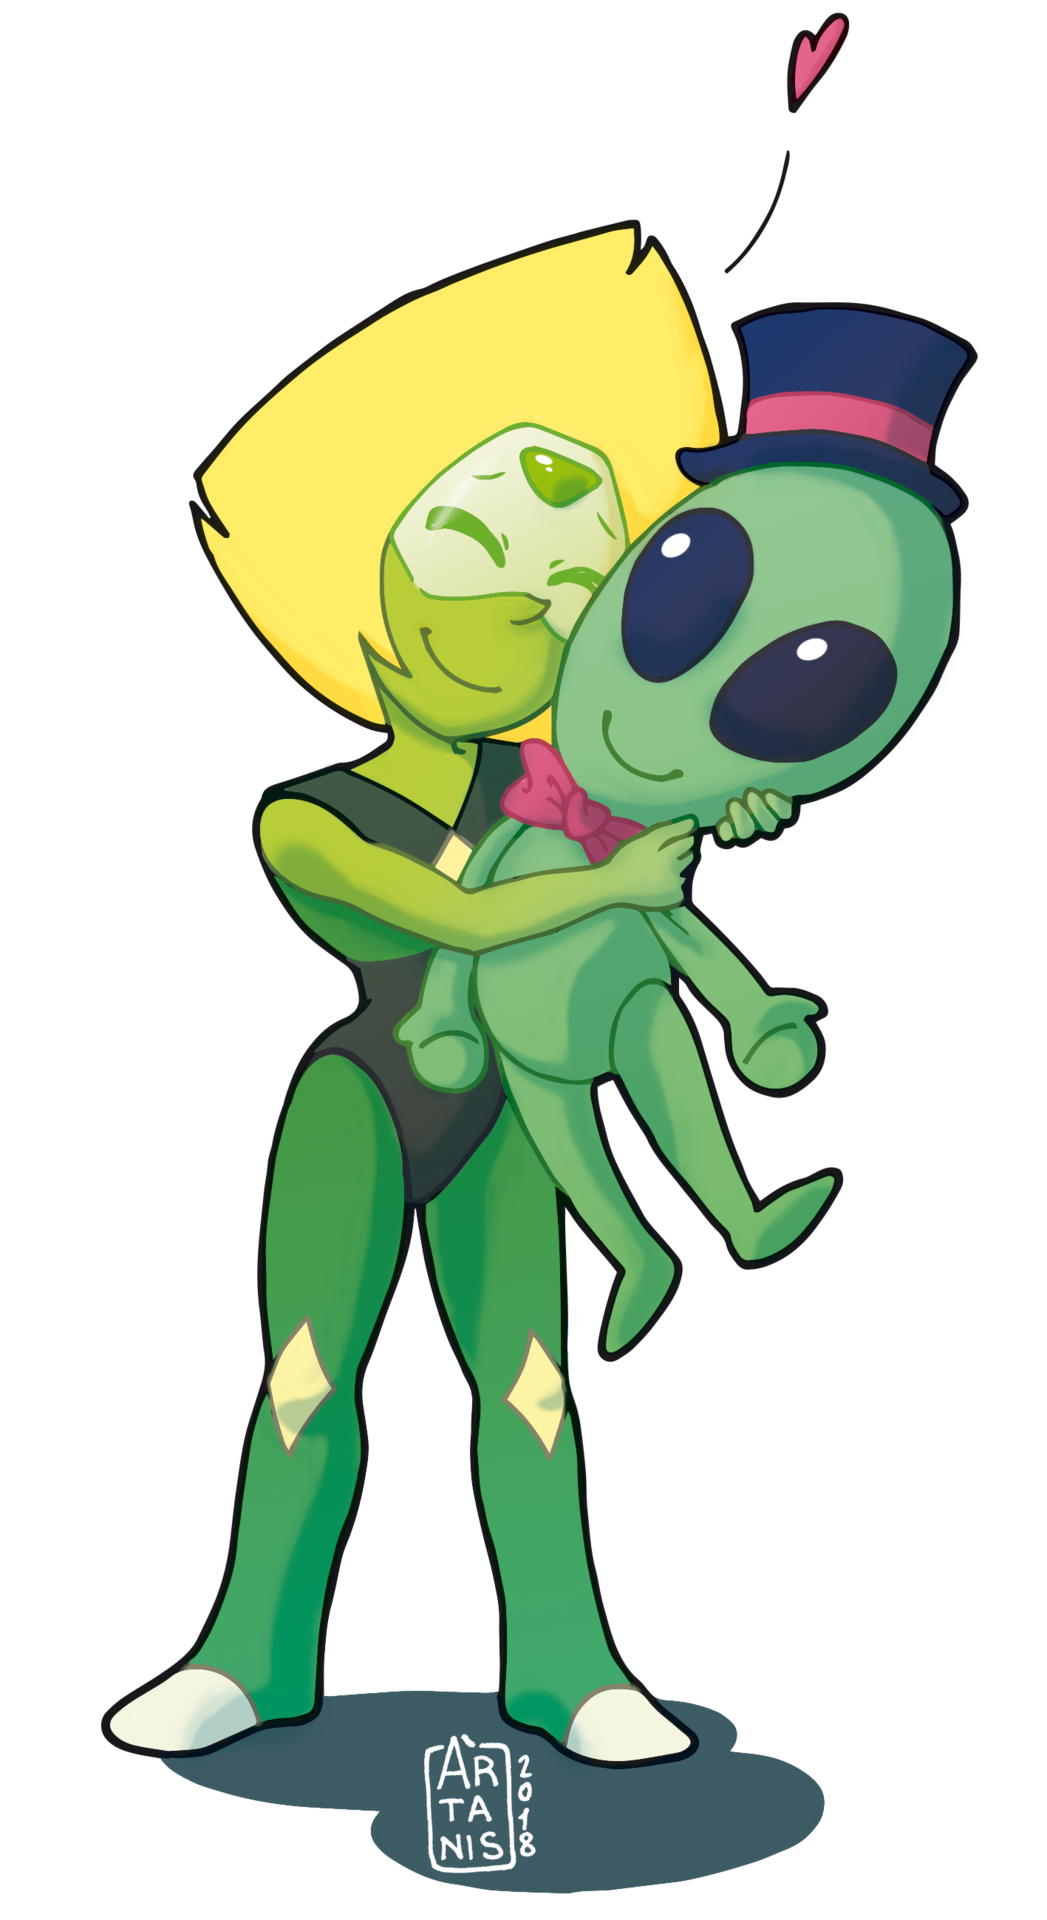 Peridot & her alien plushI had to draw her, because she’s my favorite gem, and she’s just too cute!I also see myself so much in her ‘cause I’m small, awkward and love aliens too! >w